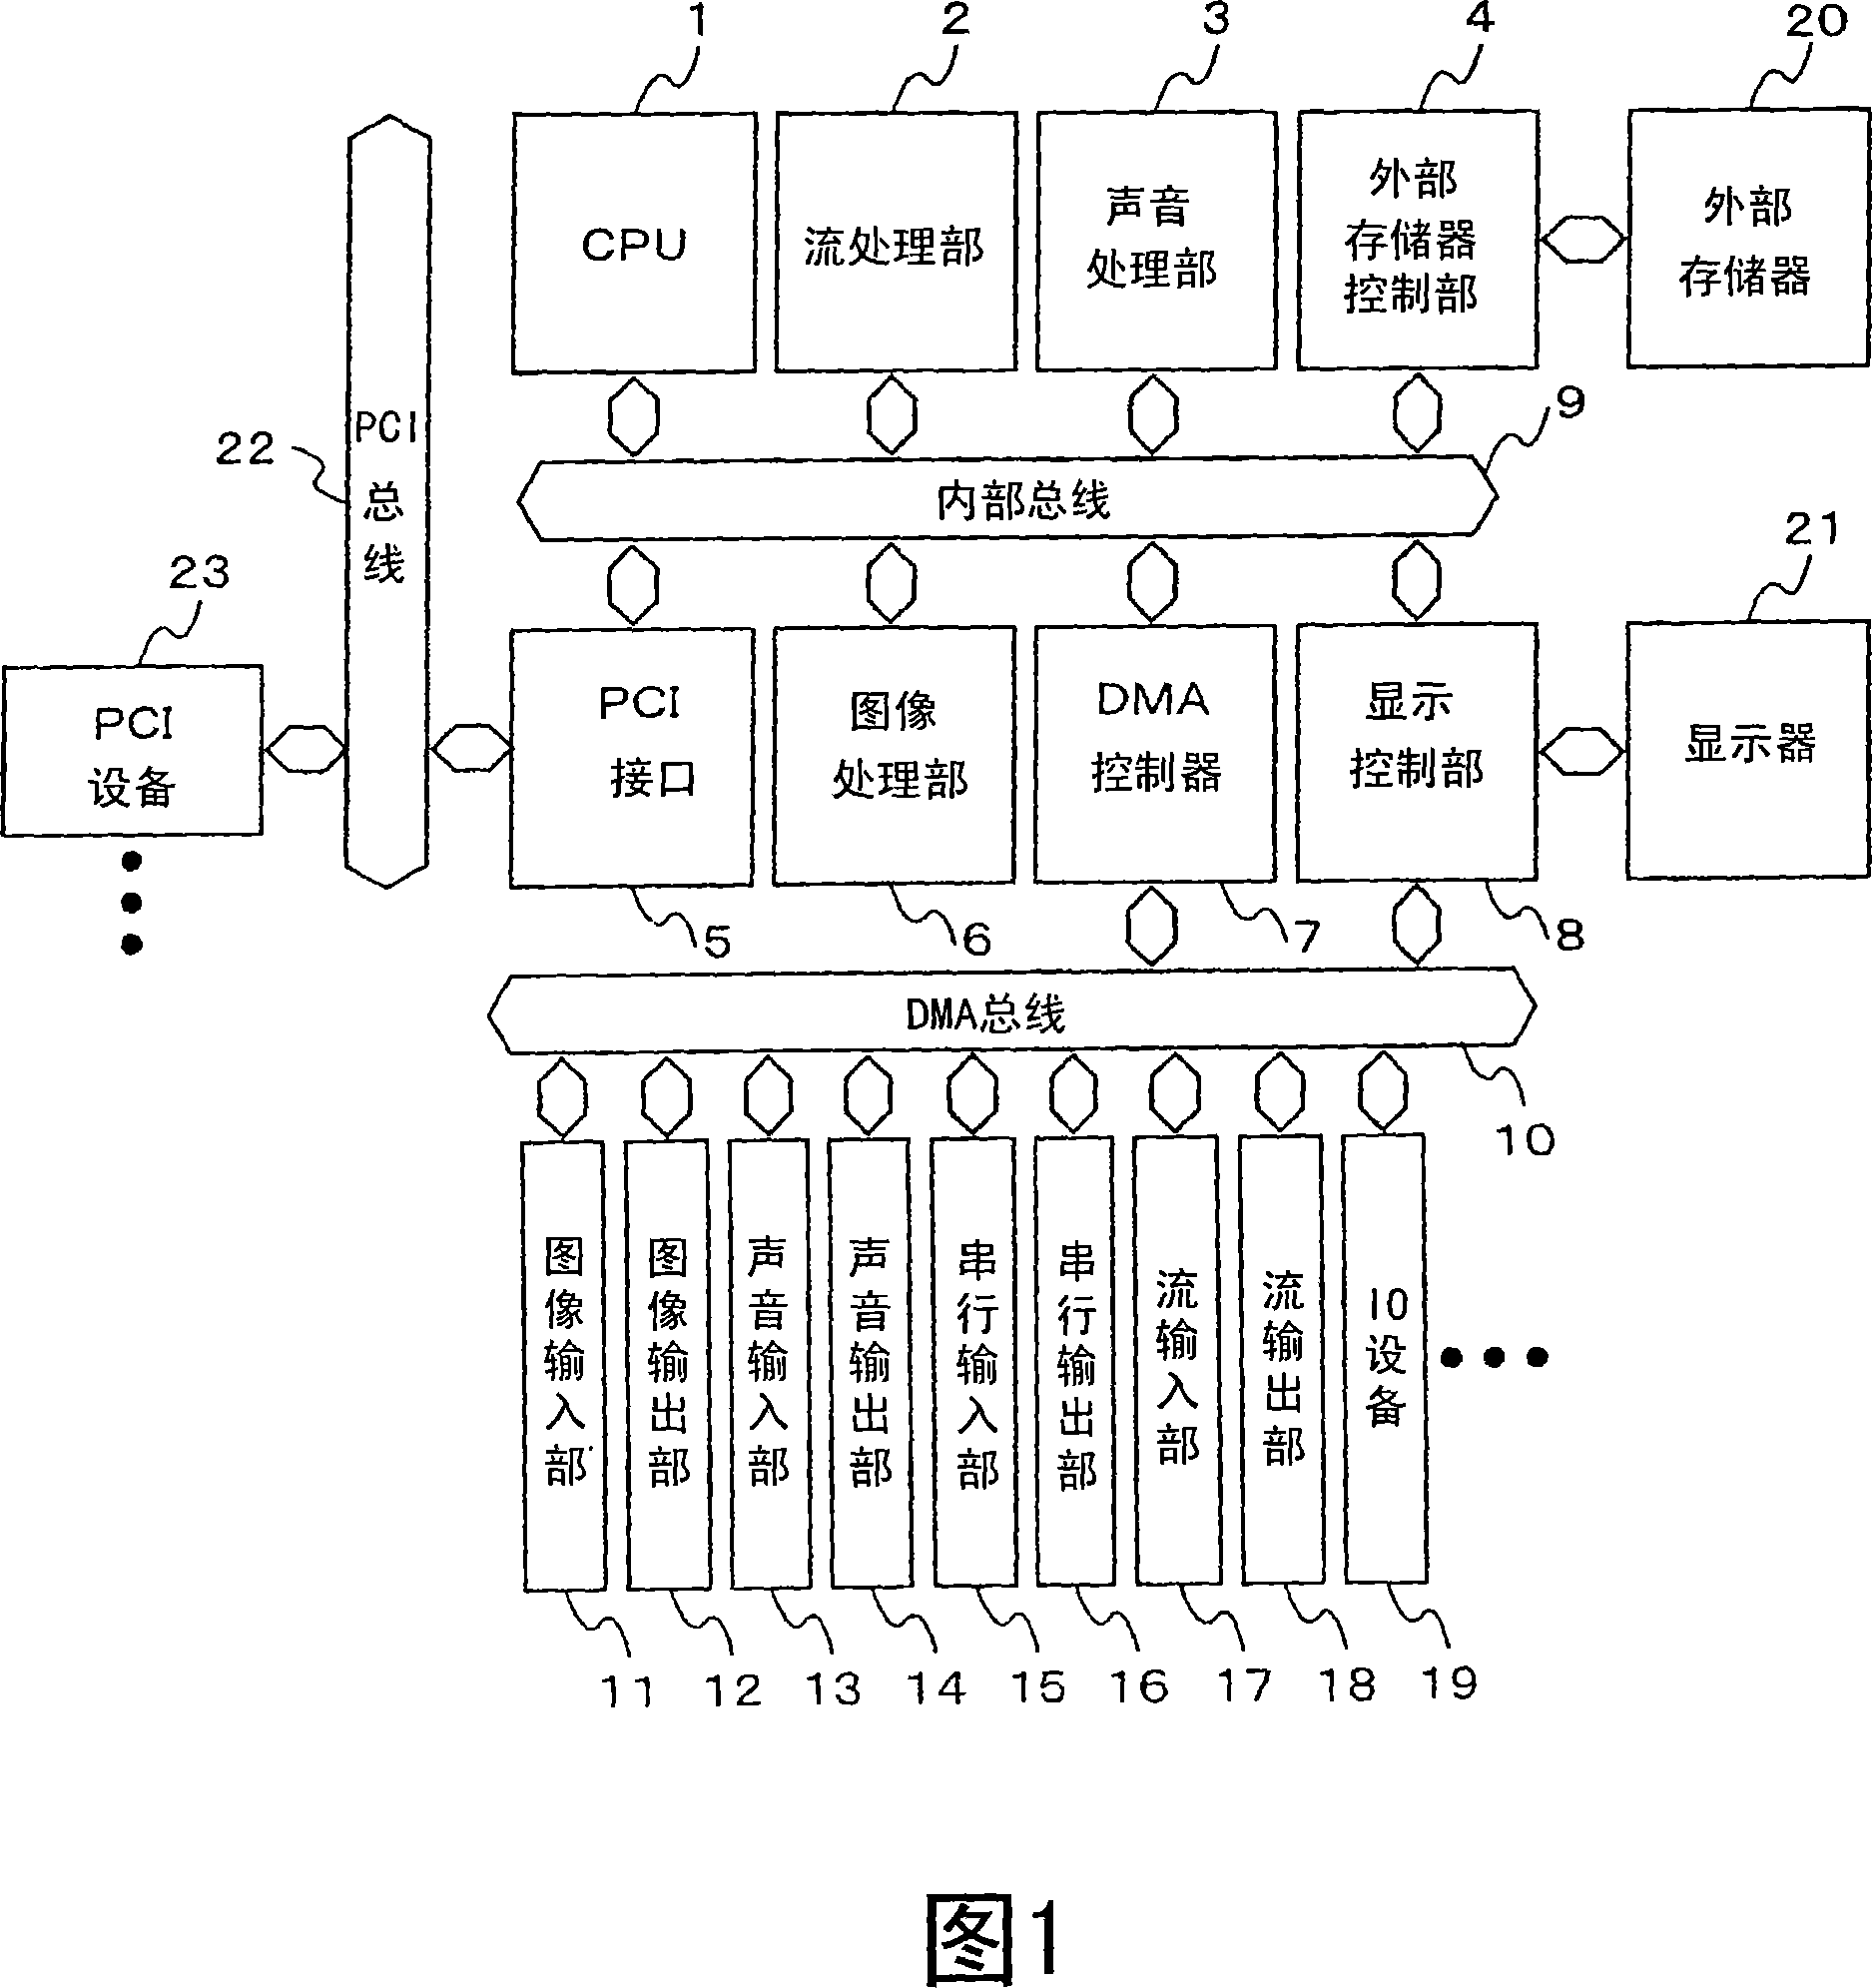 Picture processing engine and picture processing system